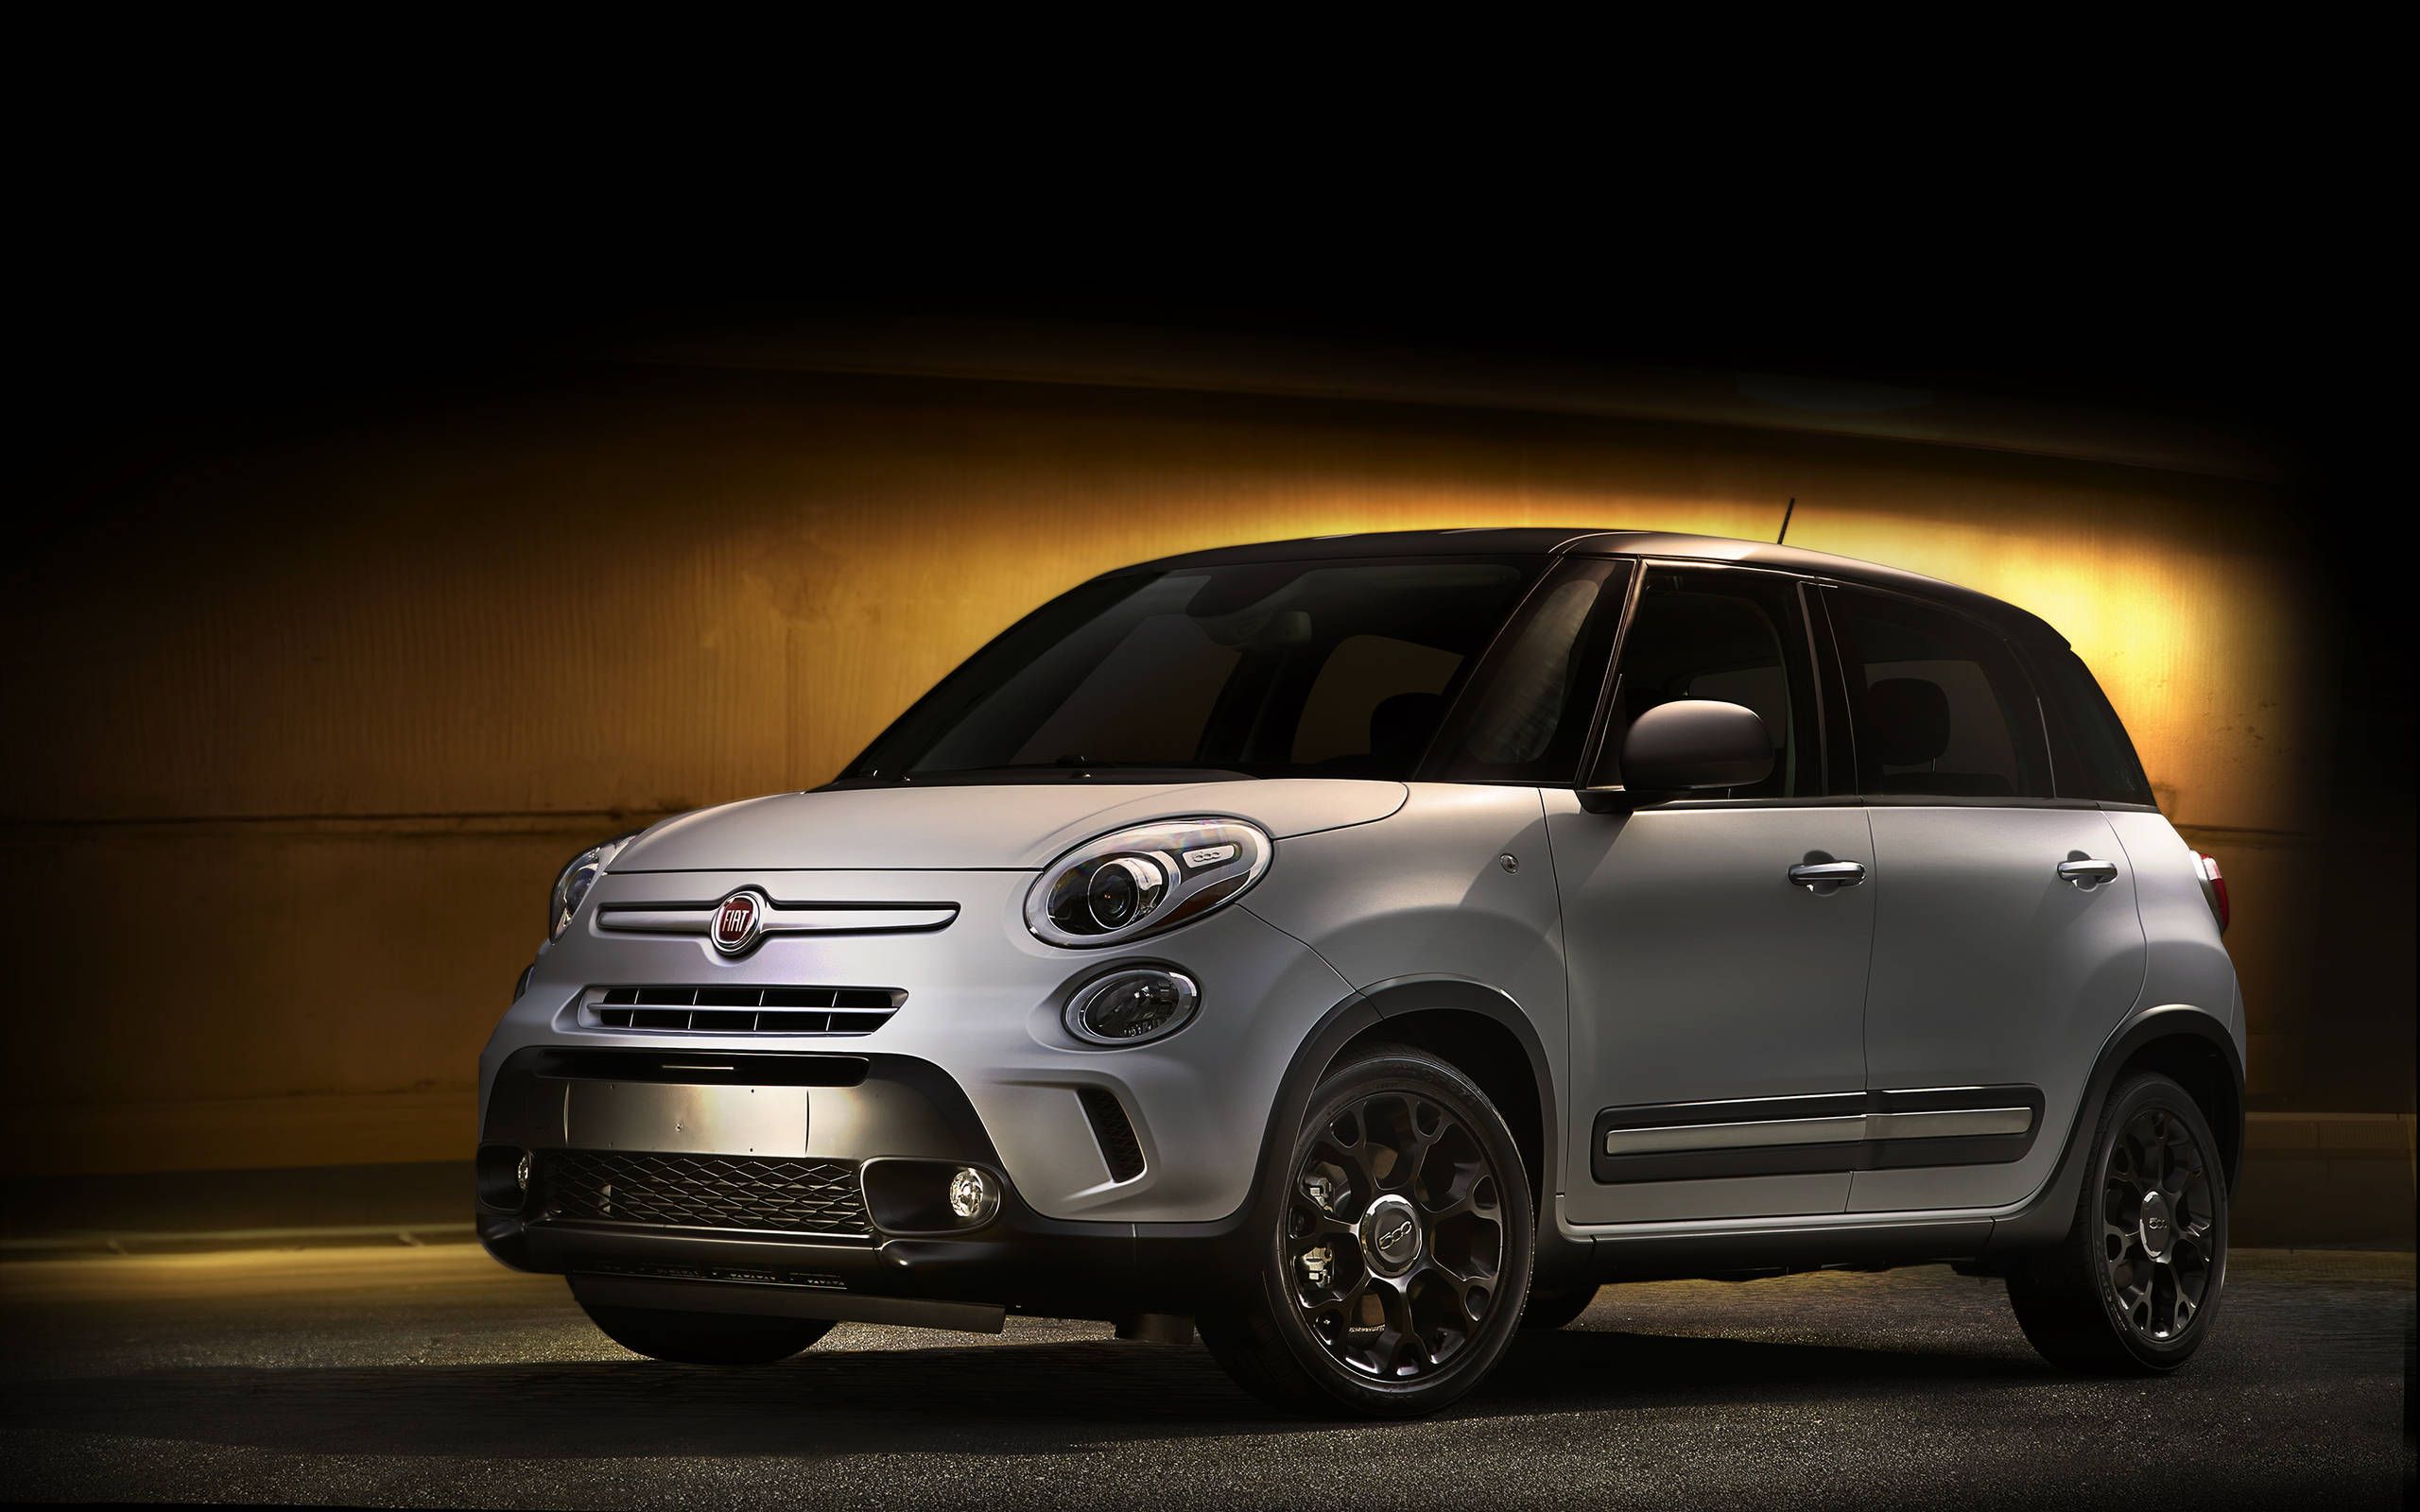 2016 Fiat 500L Trekking review: Useful, but dorky